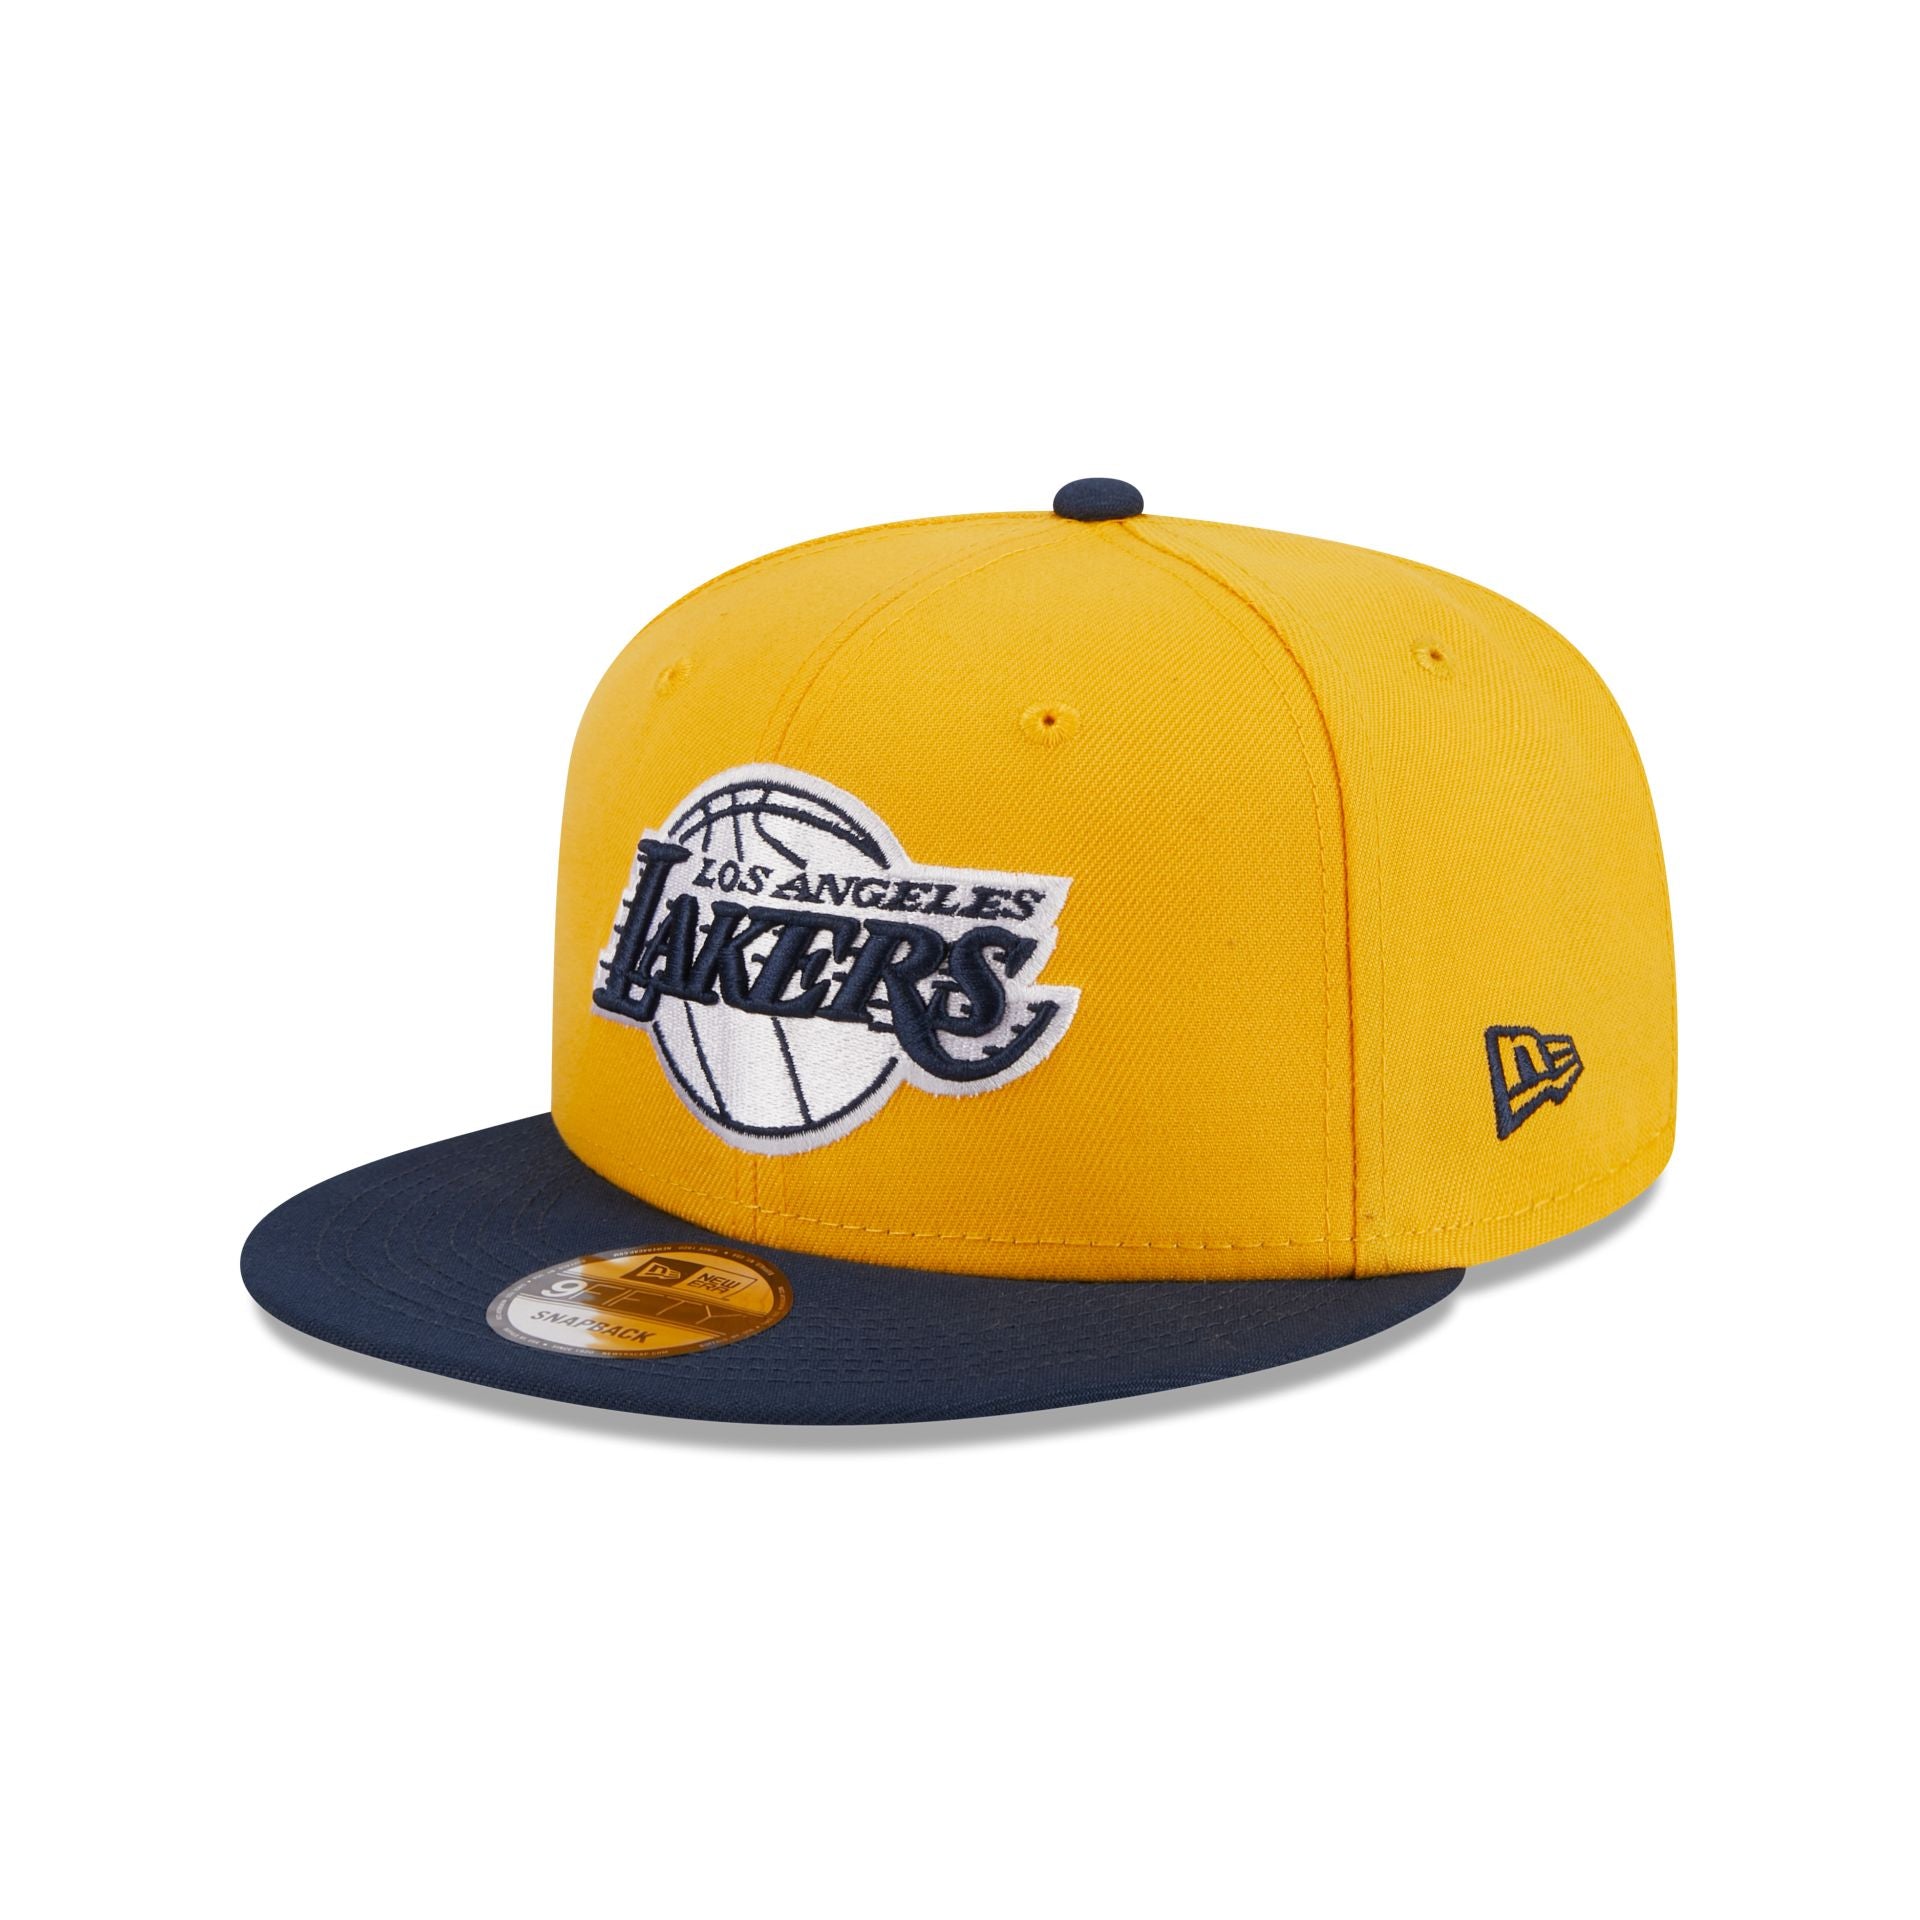 Los Angeles Lakers New Era Color Pack 9FIFTY Snapback Hat - Gray